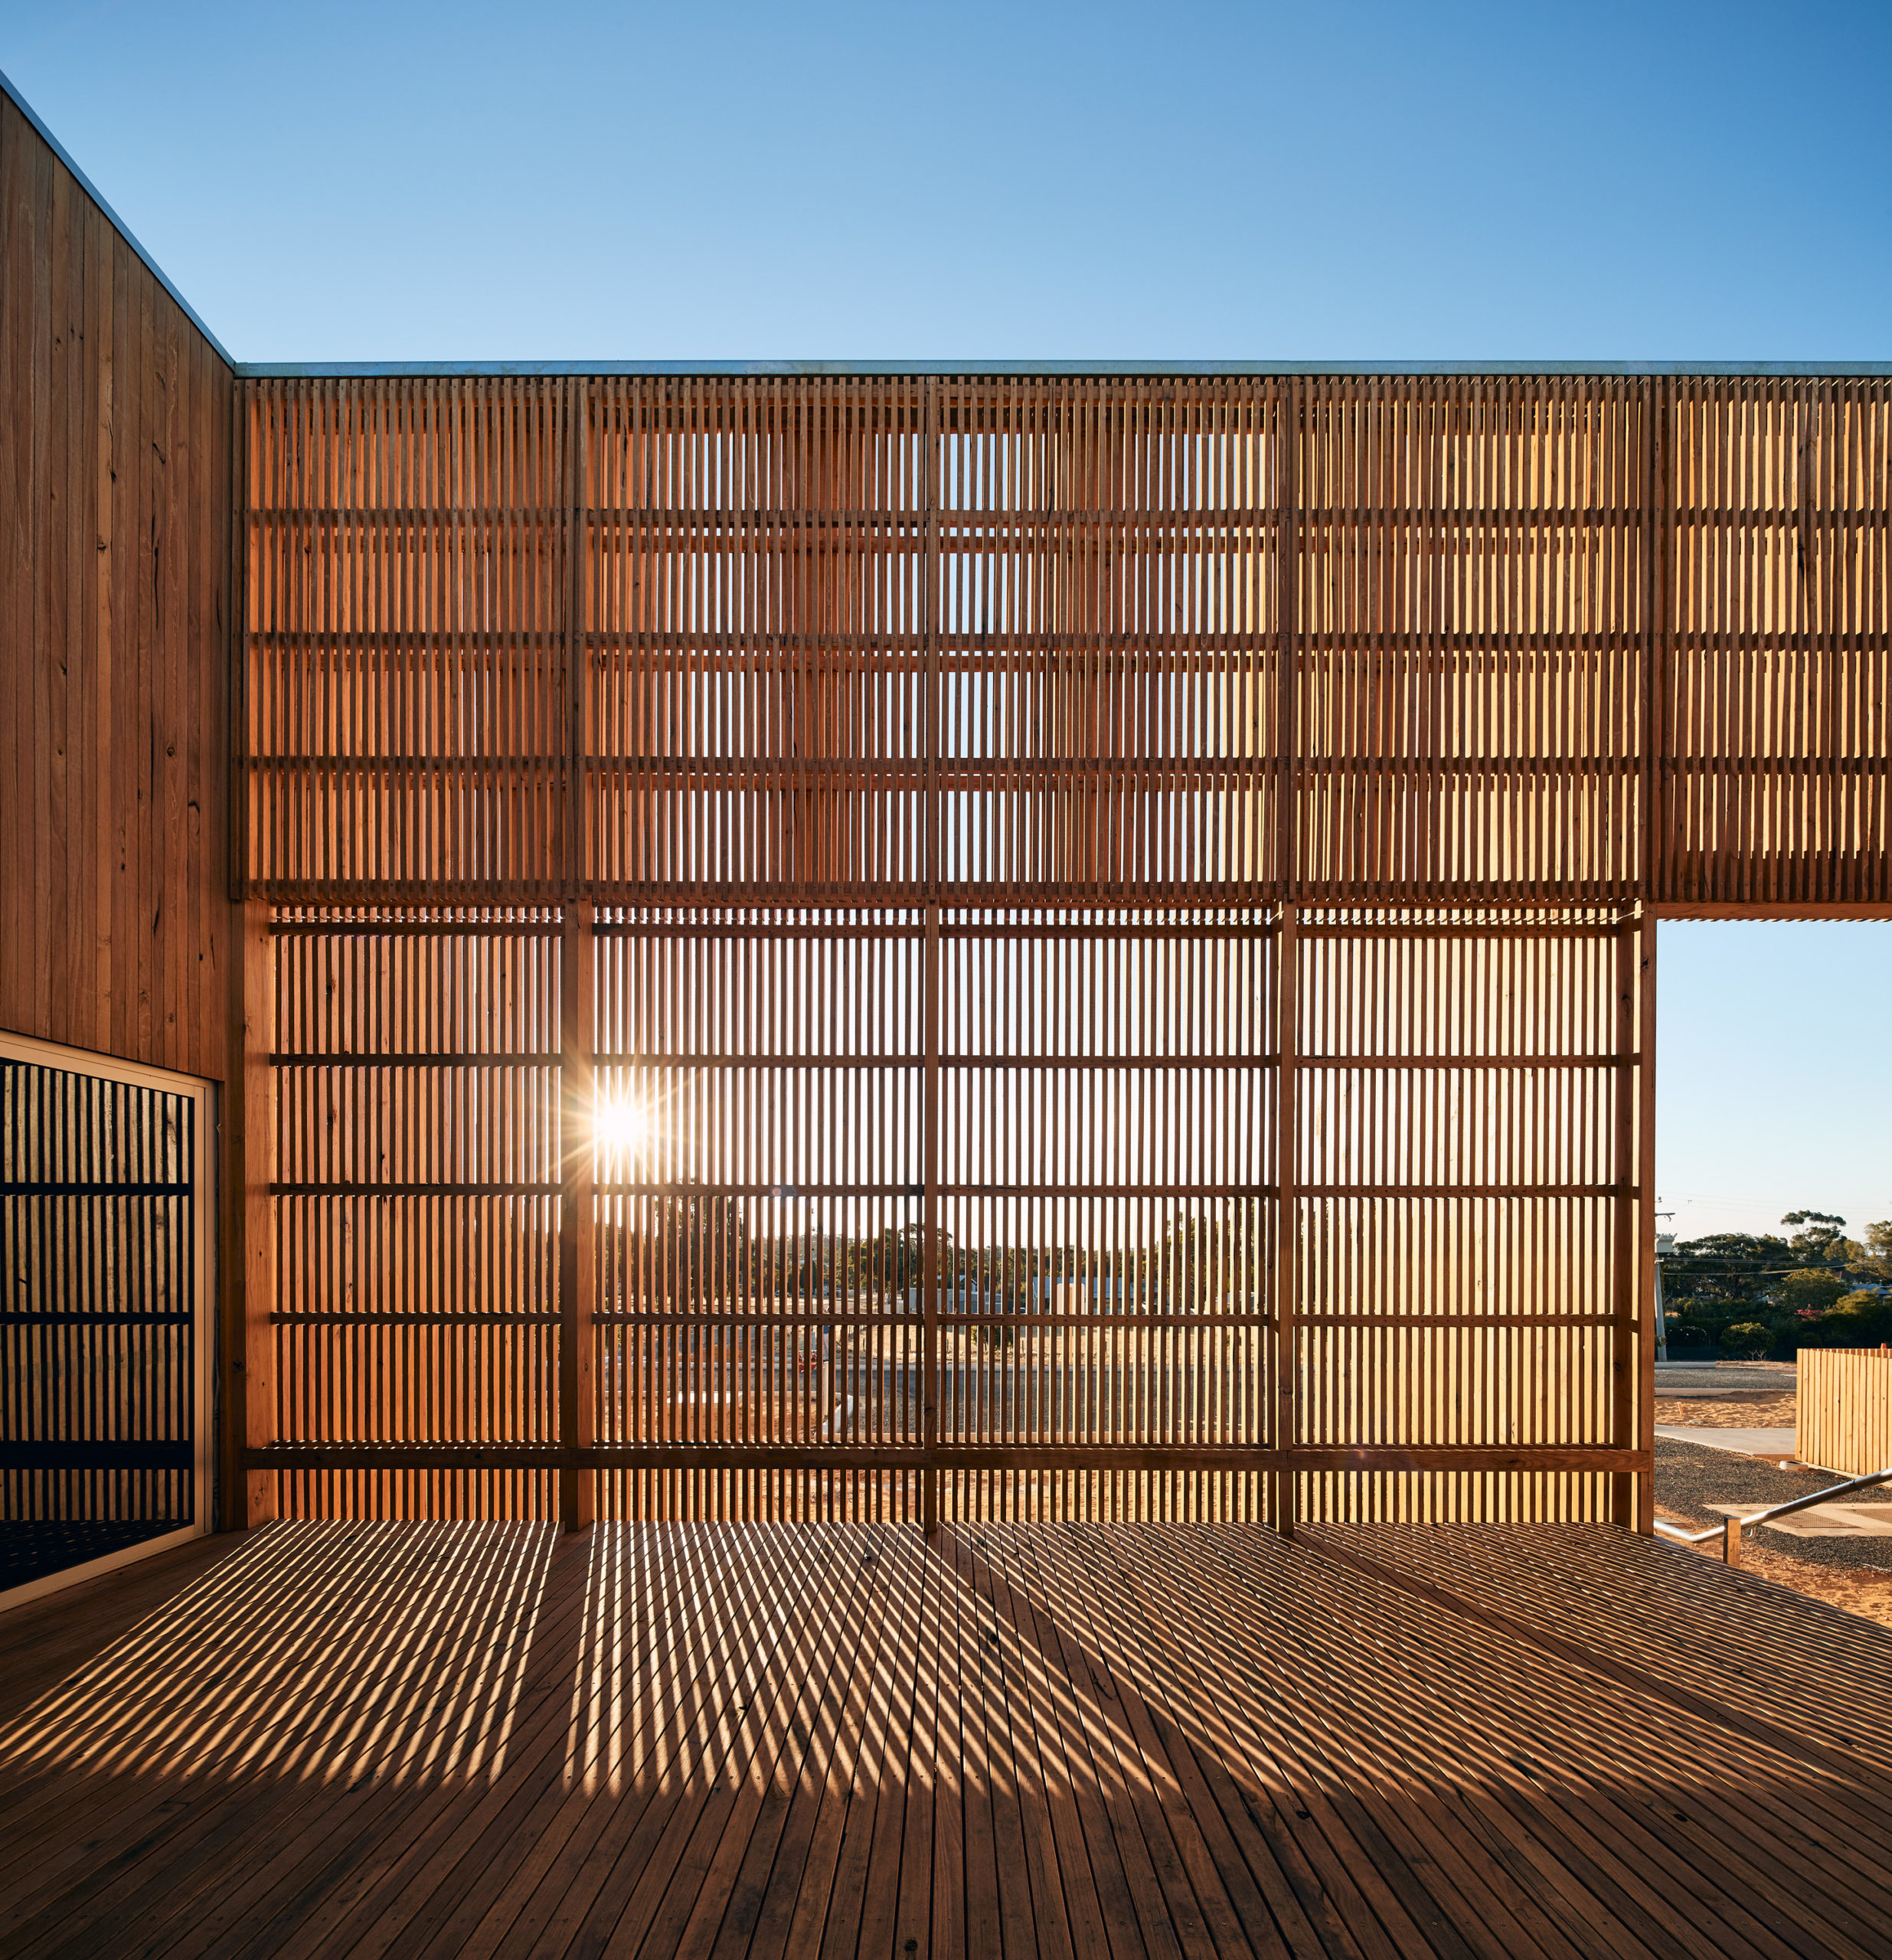 Pingelly Recreation and Cultural Centre by Iredale Pedersen Hook Architects with ATC Studio, Pingelly, Australia